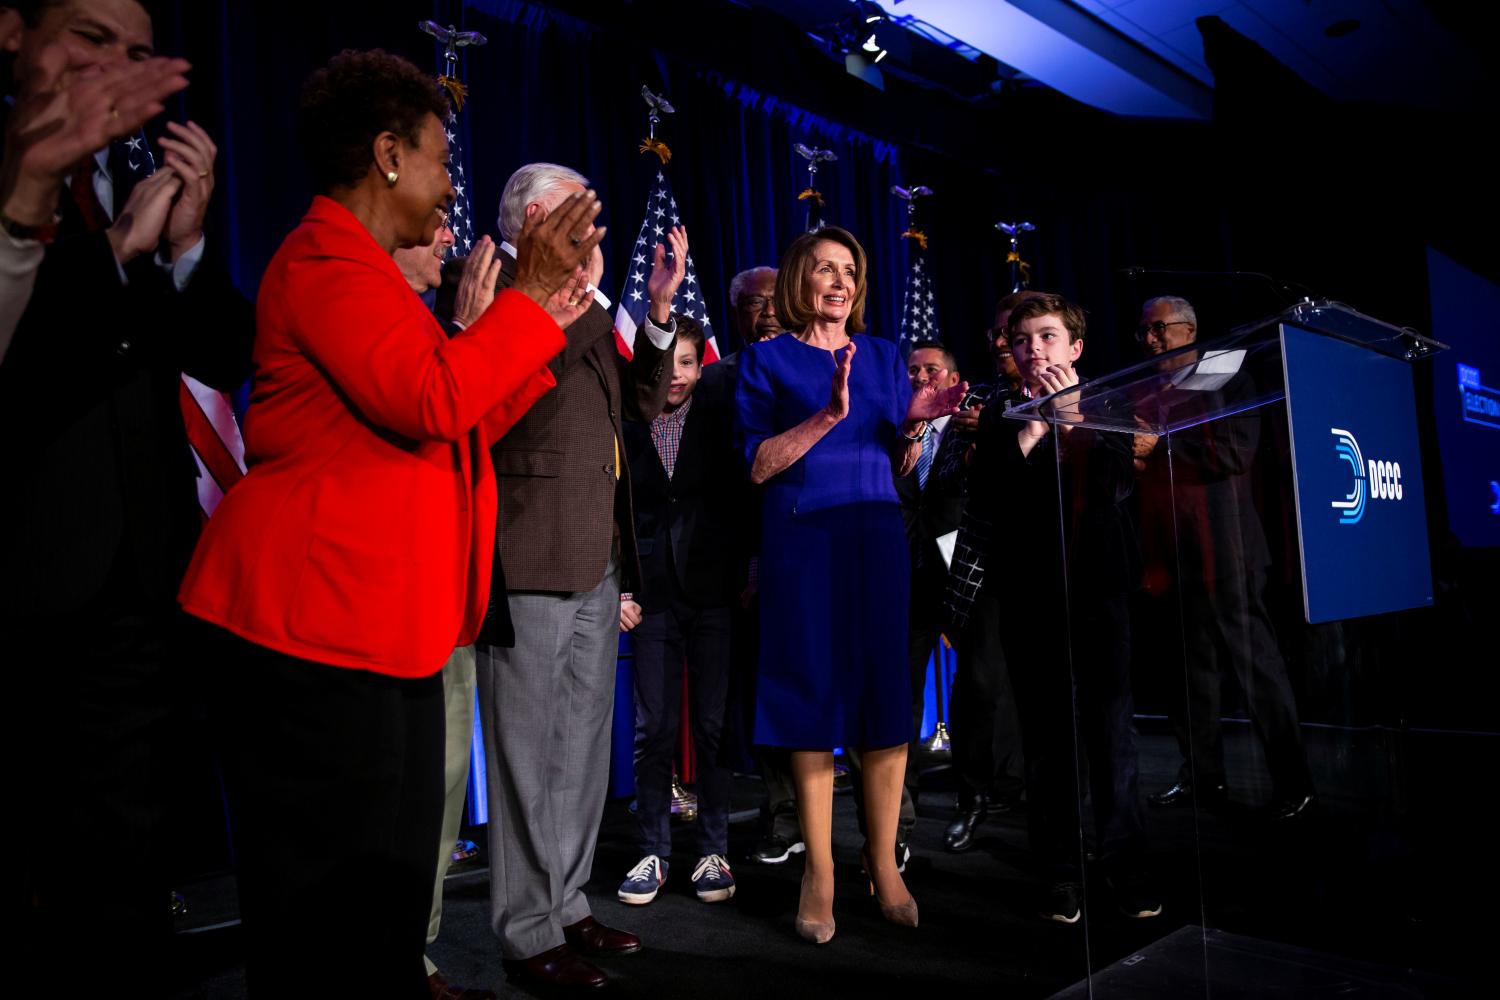 U.S. House Minority Leader Nancy Pelosi reacts alongside fellow House Democrats to the results of the U.S. midterm elections at a Democratic election night rally in Washington, U.S. November 6, 2018. REUTERS/Al Drago - RC12CAFEB860